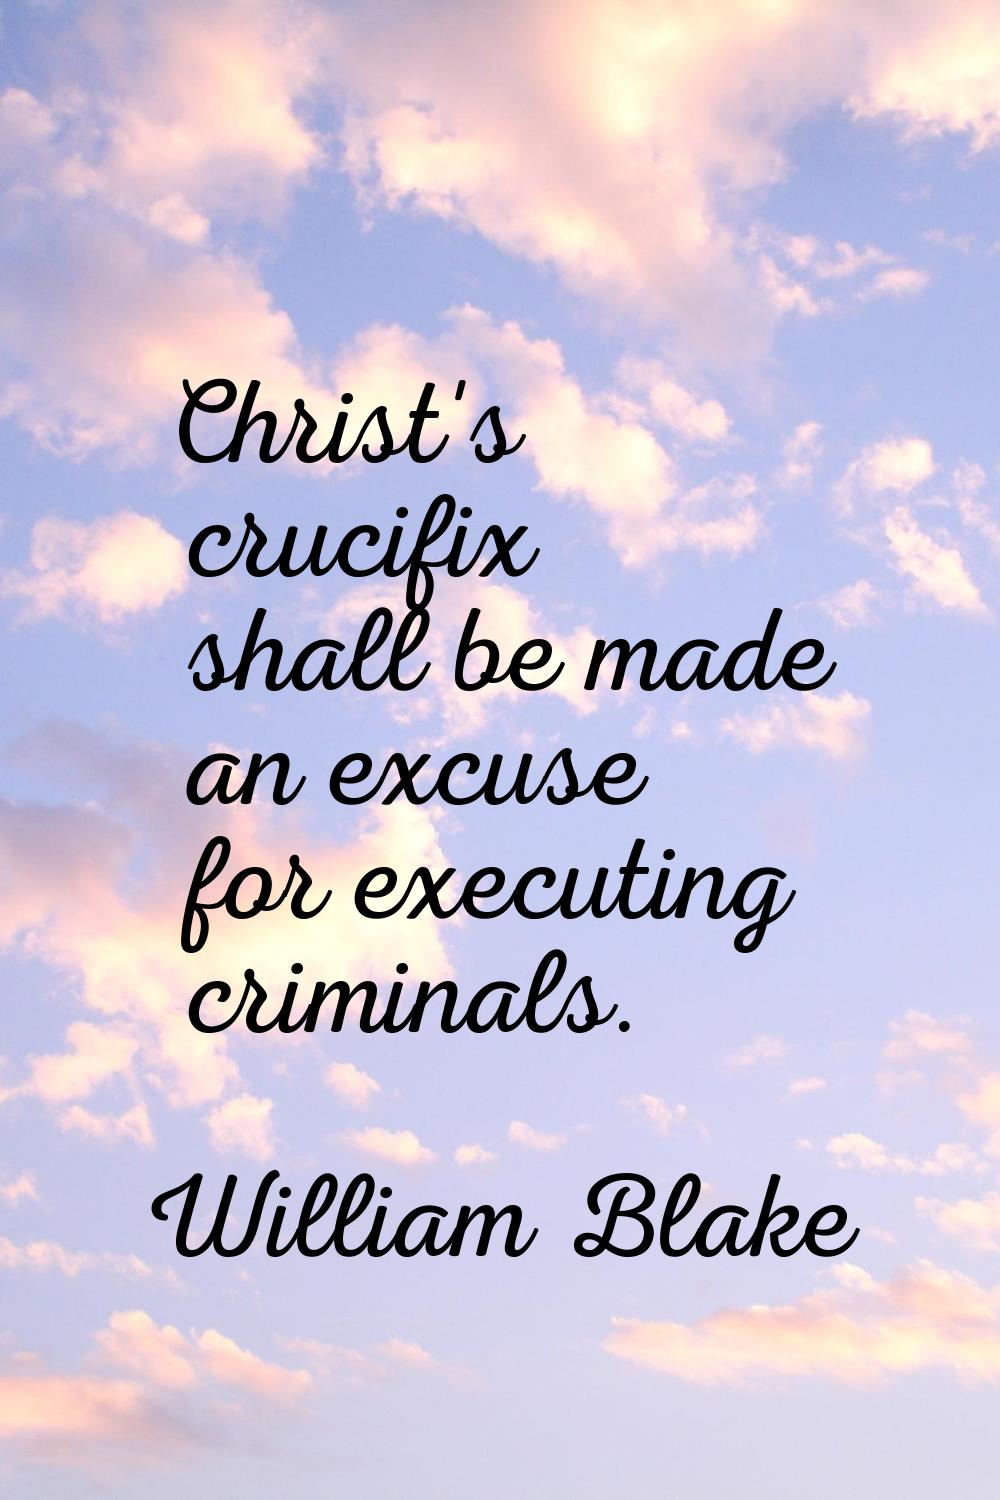 Christ's crucifix shall be made an excuse for executing criminals.